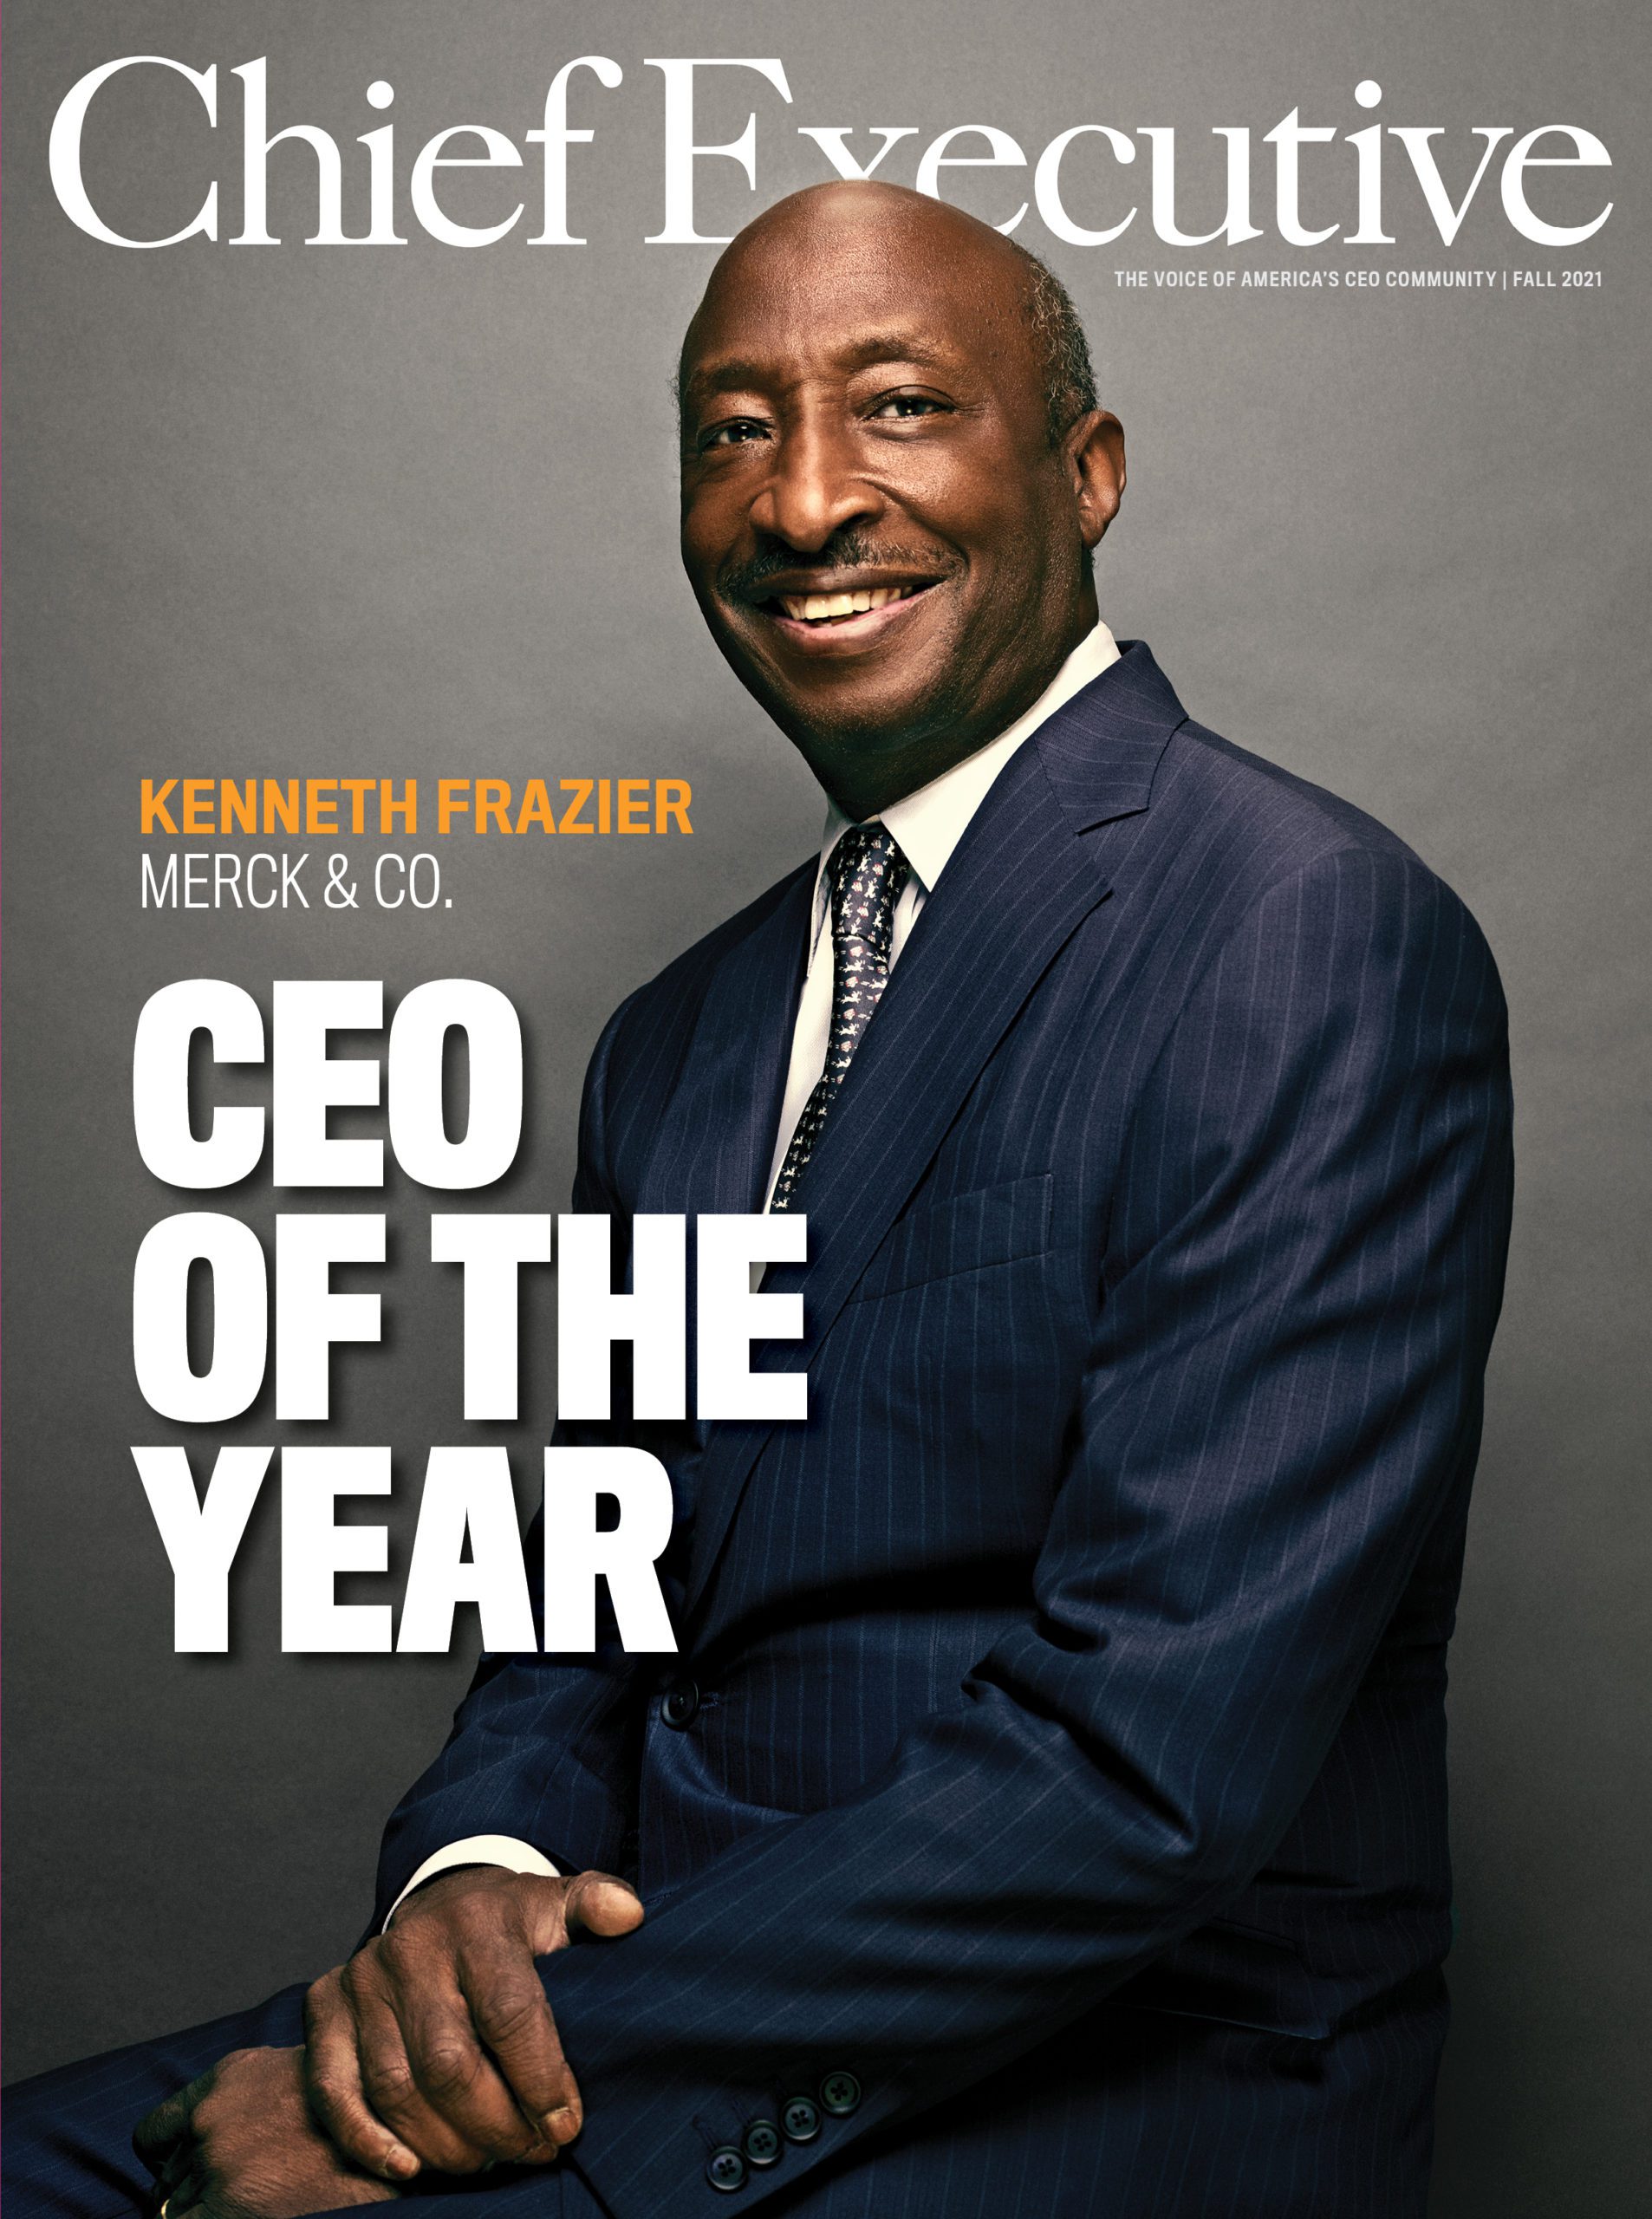 Kenneth Frazier CEO of the Year Cover